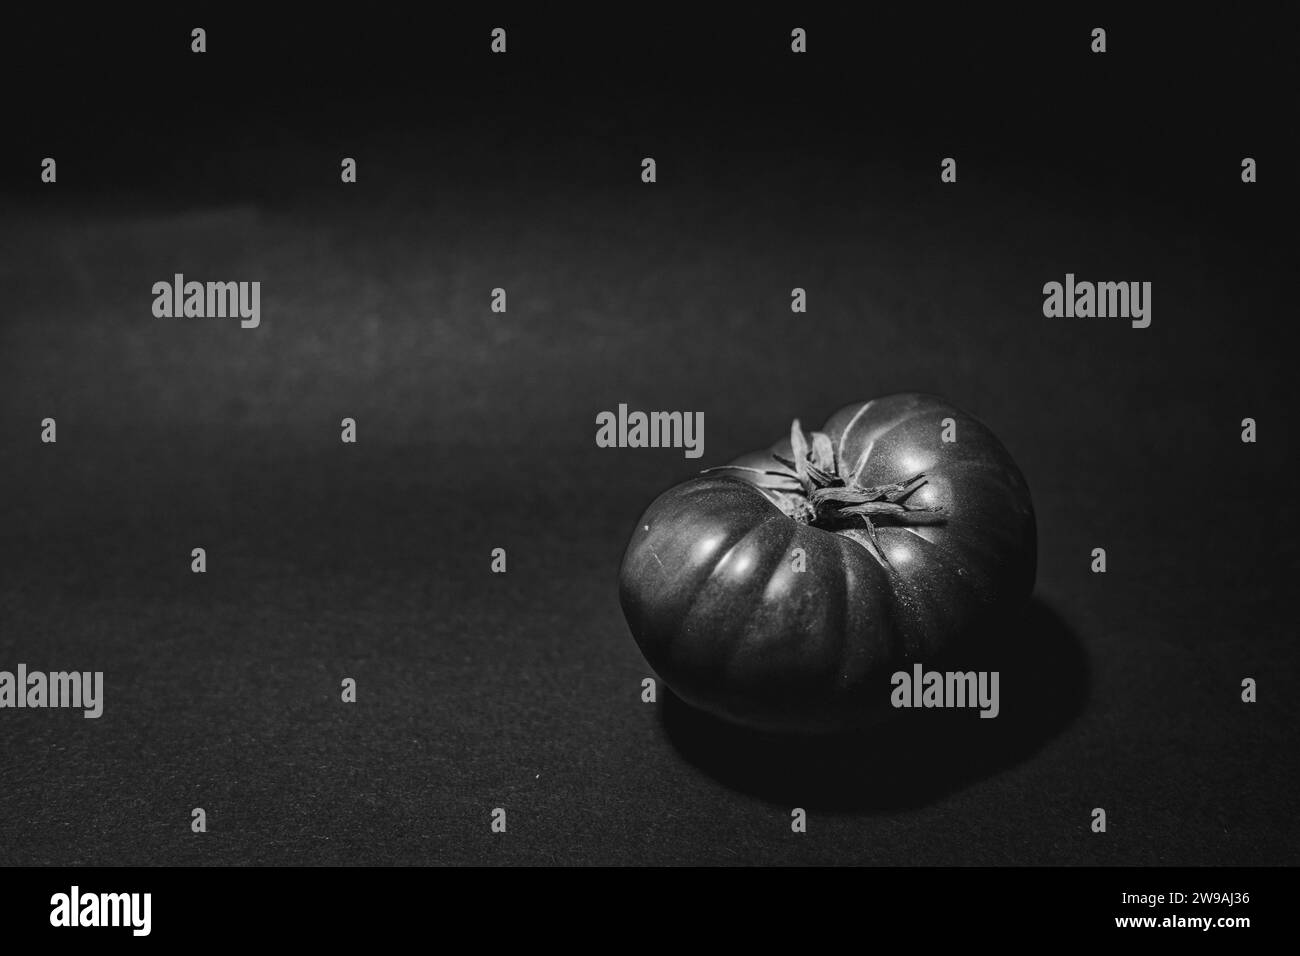 A grayscale shot of a ripe Spanish tomato on a solid tabletop, isolated on a blank background Stock Photo